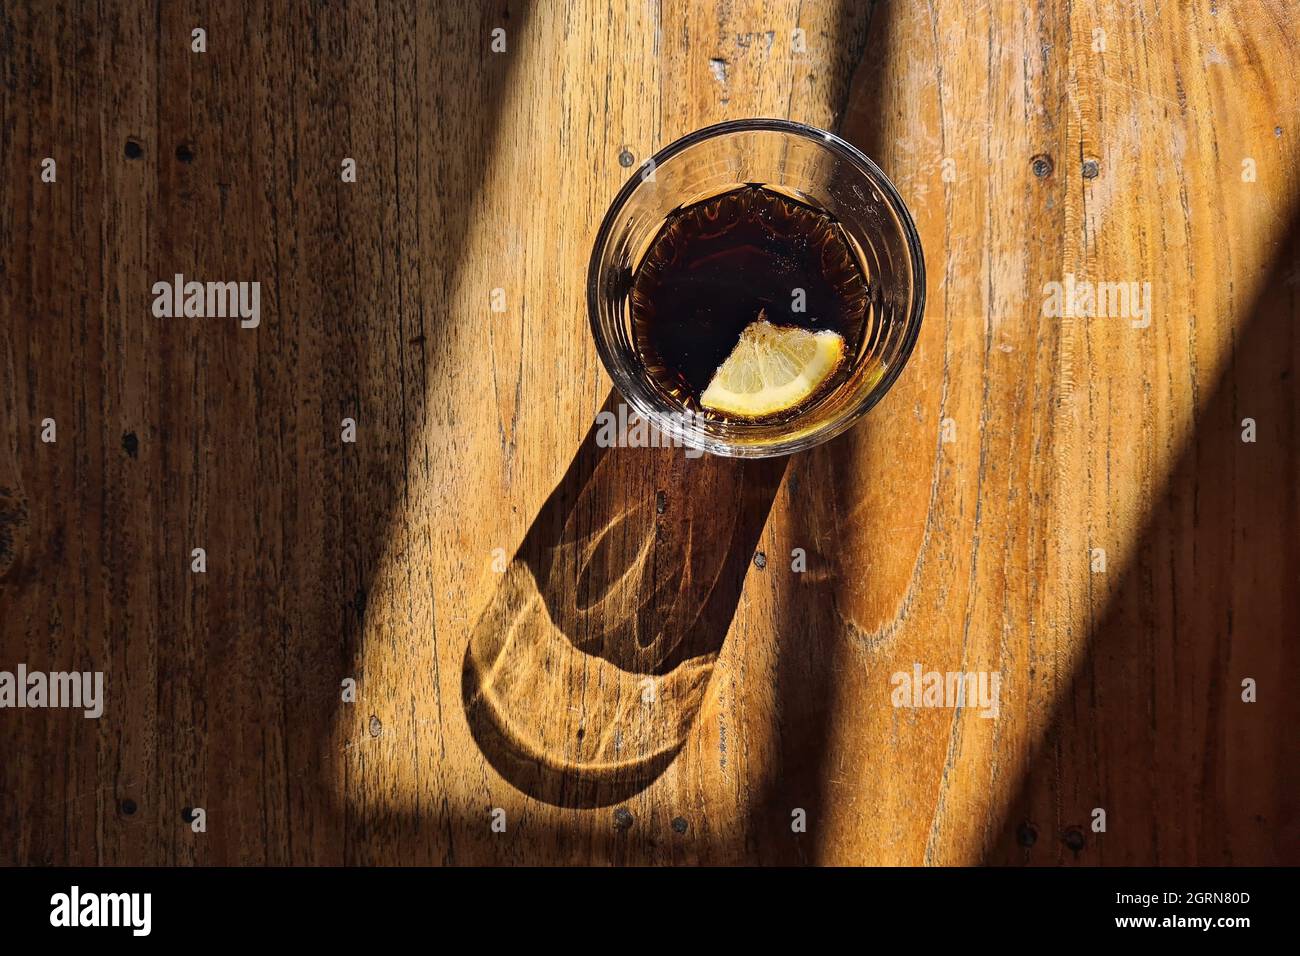 Drinking glass with cola drink. Light and shadow on wooden table. Stock Photo